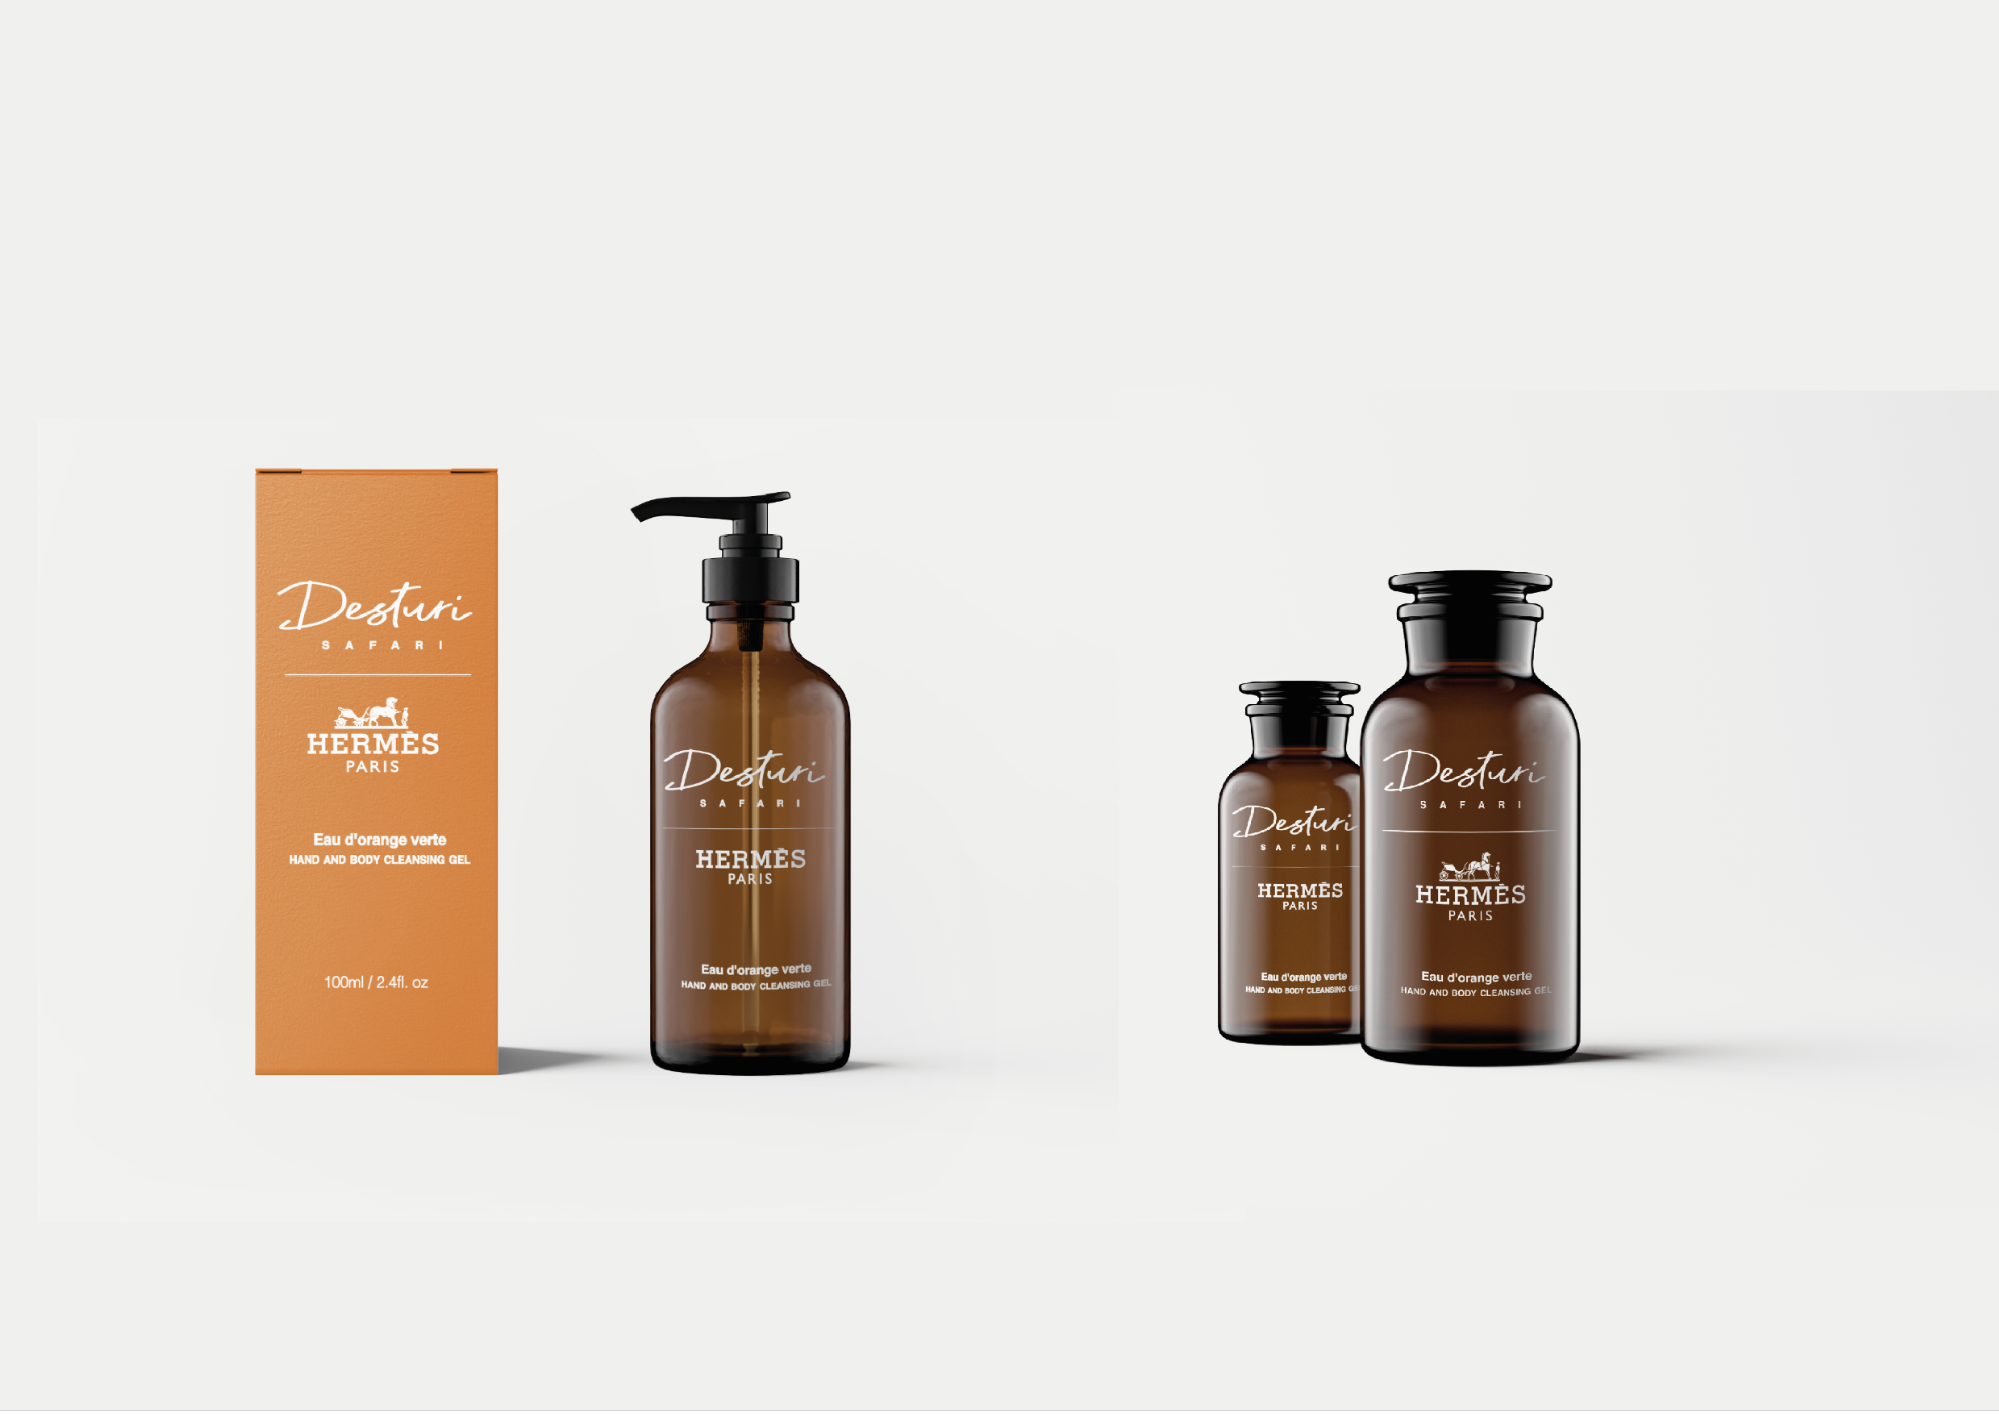 Desturi Co-Branding with luxury brand Hermès for hotel amenities and packaging